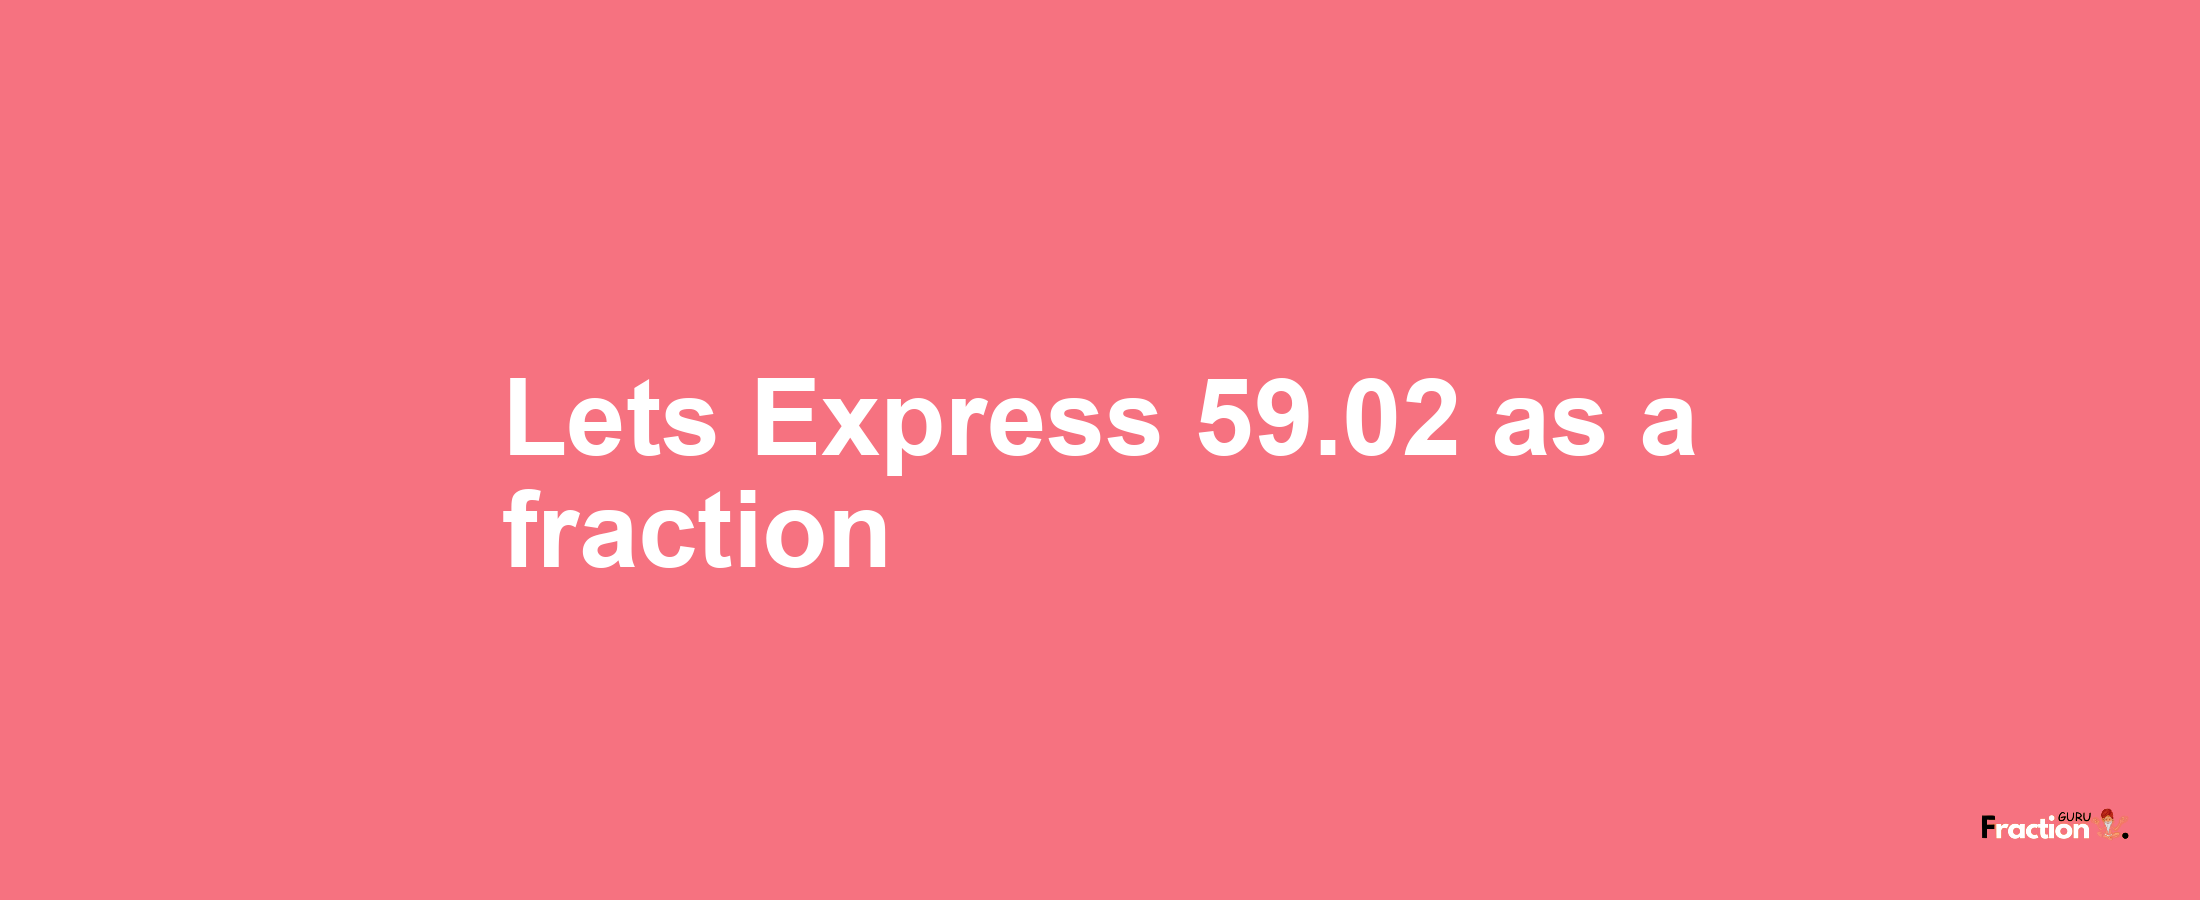 Lets Express 59.02 as afraction